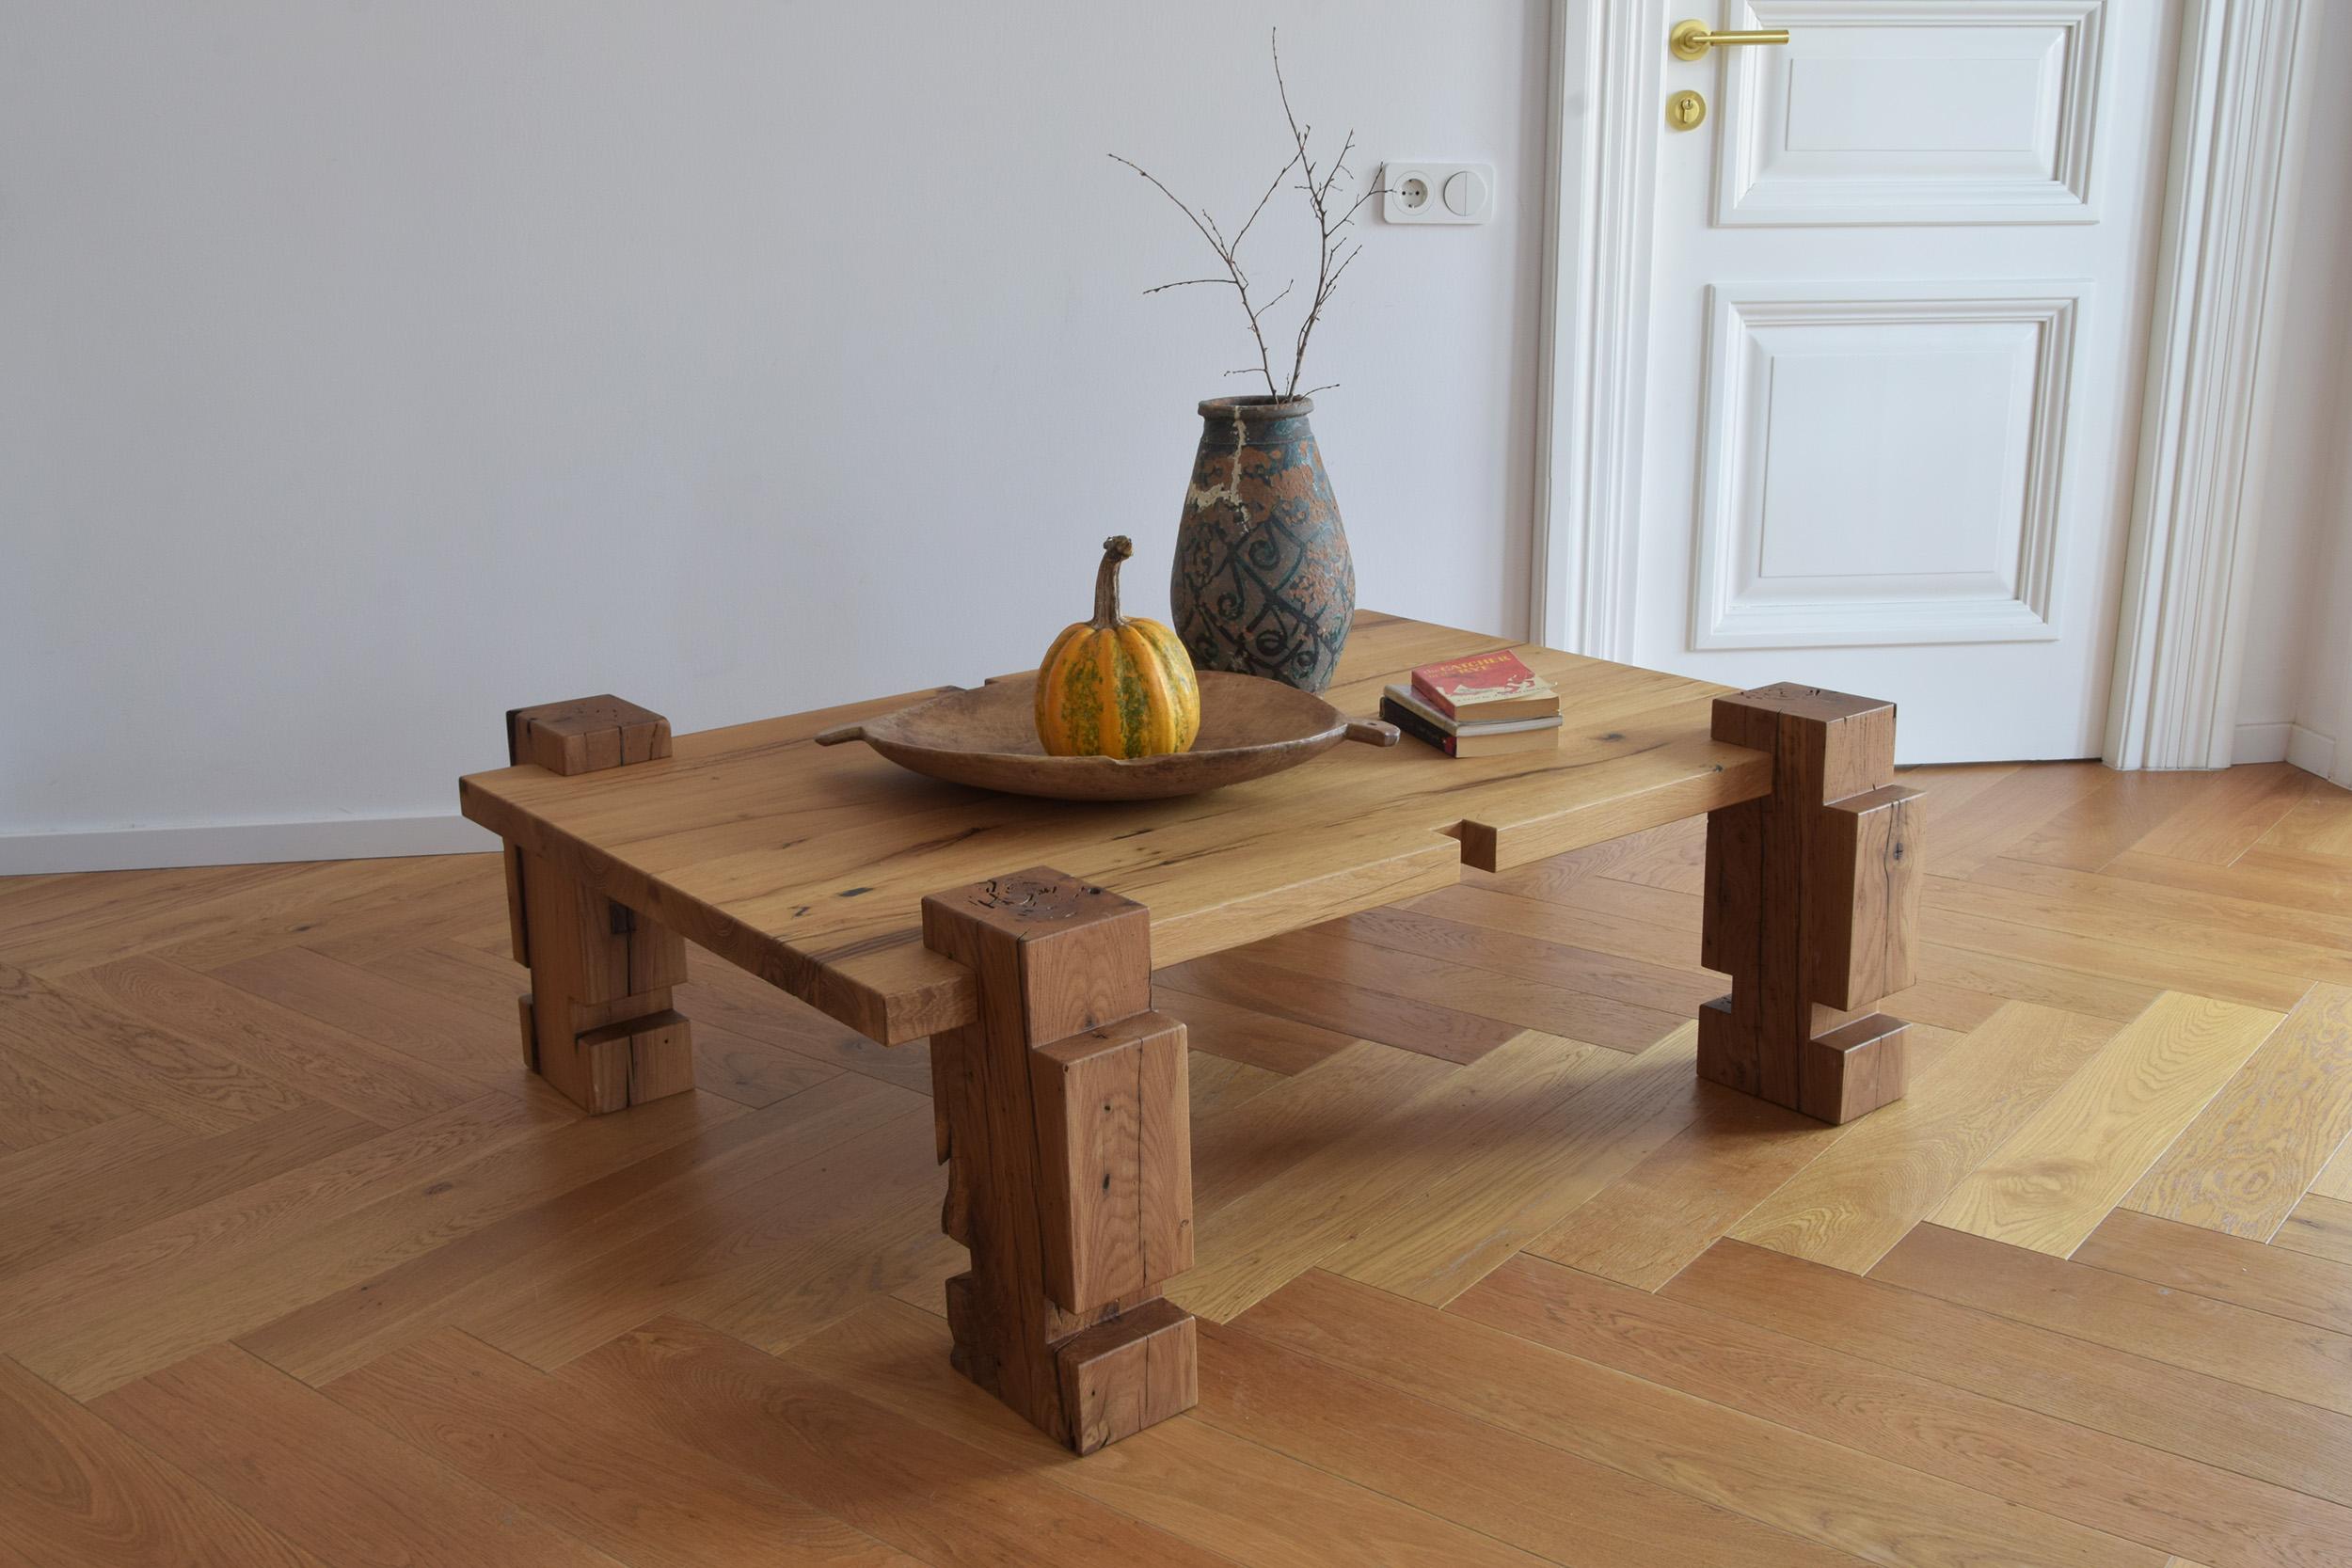 Element Coffee Table by Nana Zaalishvili
Dimensions: W 120 x D 90 x H 35 cm
Materials: Century Old Oak

Made of solid oak, this coffee table is one of the pieces of the ‘Element’ collection influenced by the Georgian Oda house and the architect